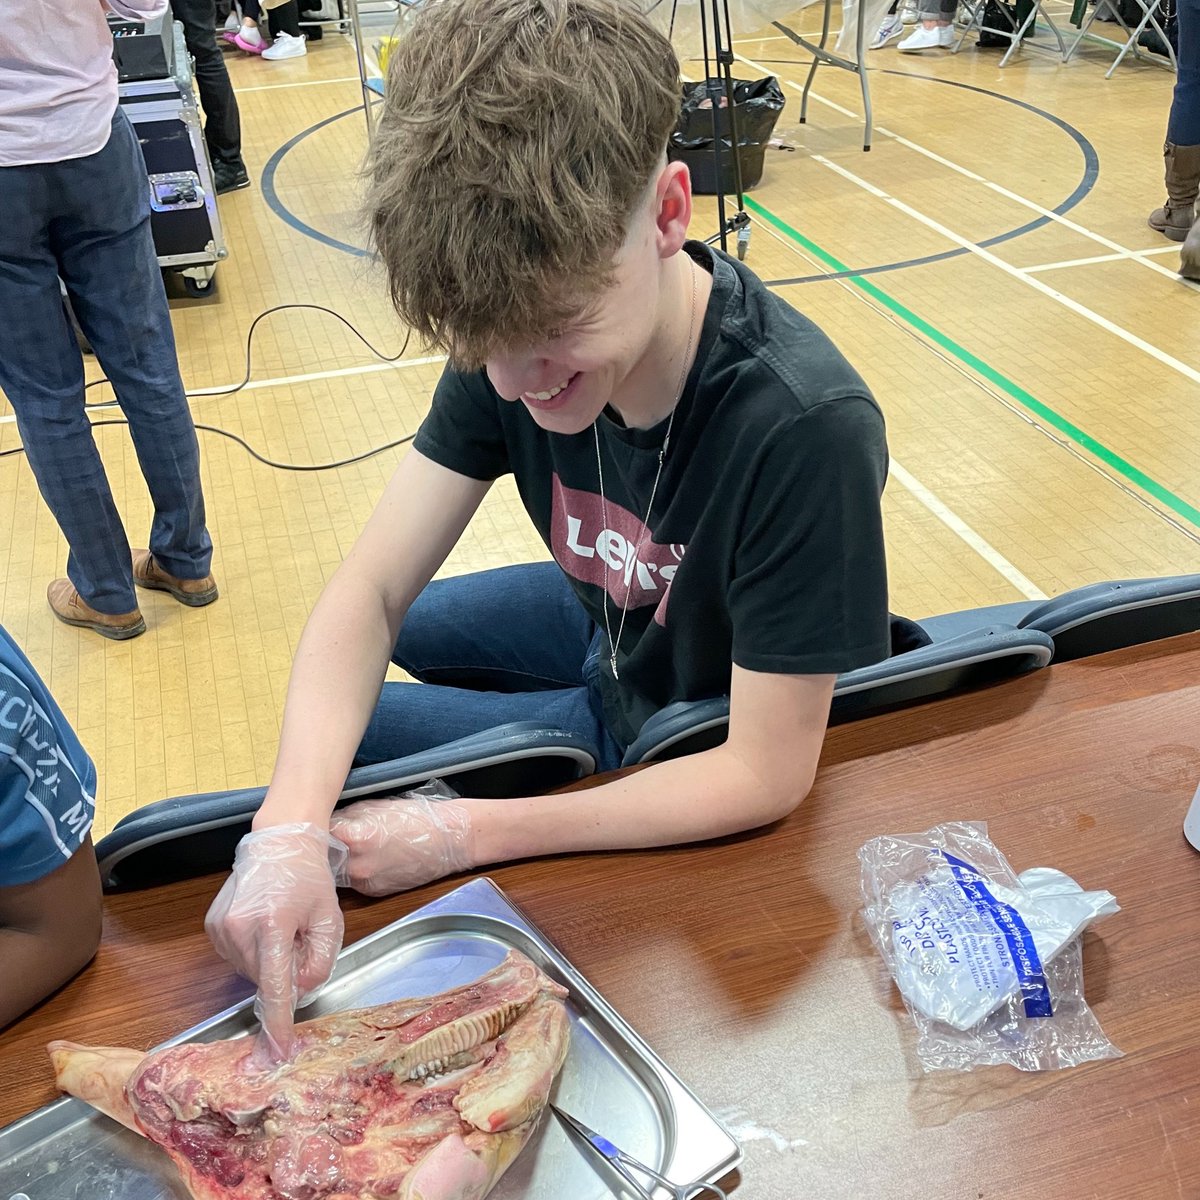 Our Year 12 & 13 A level Biology students recently took a trip to see The Post Mortem Live ! They were shown live demonstrations of how to navigate the human body and got the chance to dissect various body parts in this exciting hands on off site visit! @postmortemlive